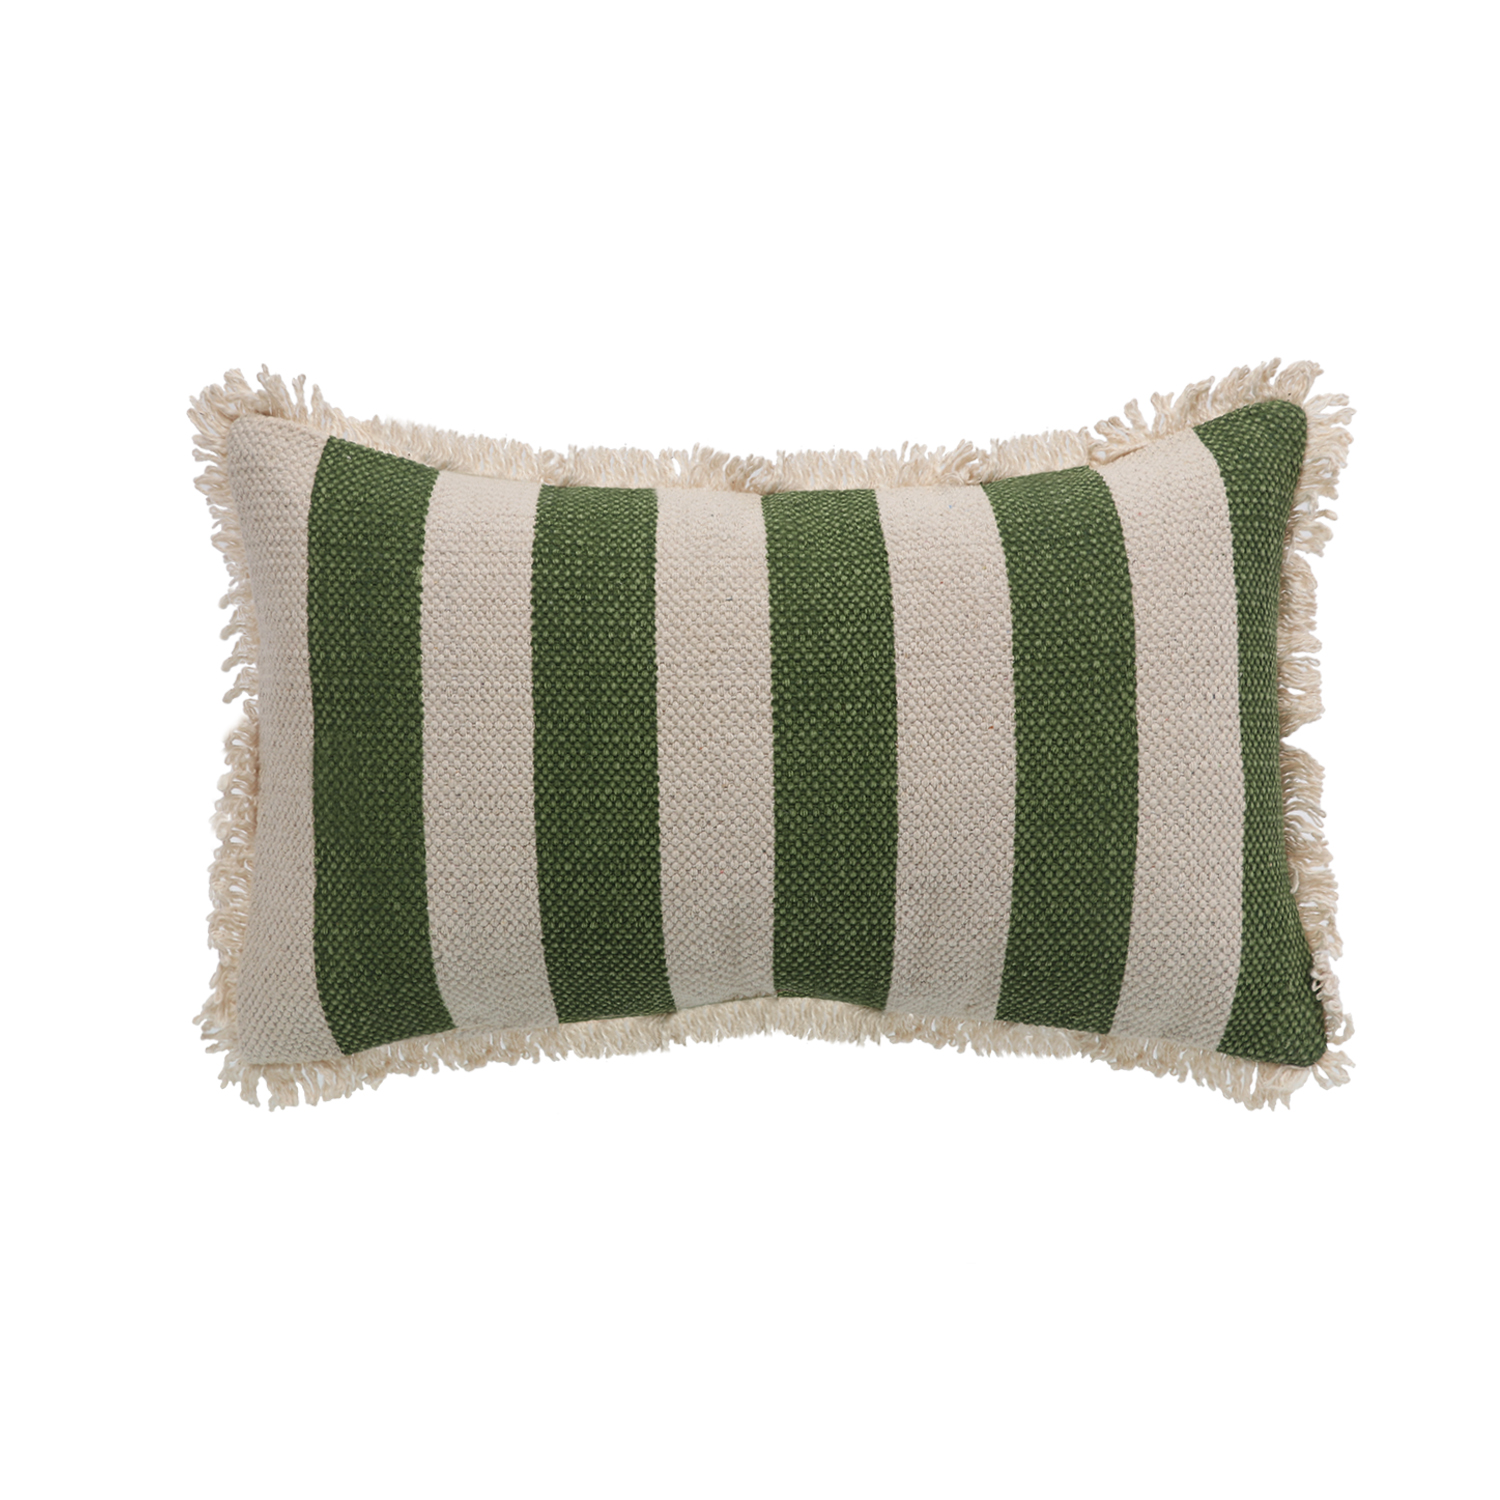 Printed Stripe Light Green  Cushions Covers with fringes 12X20 Inch